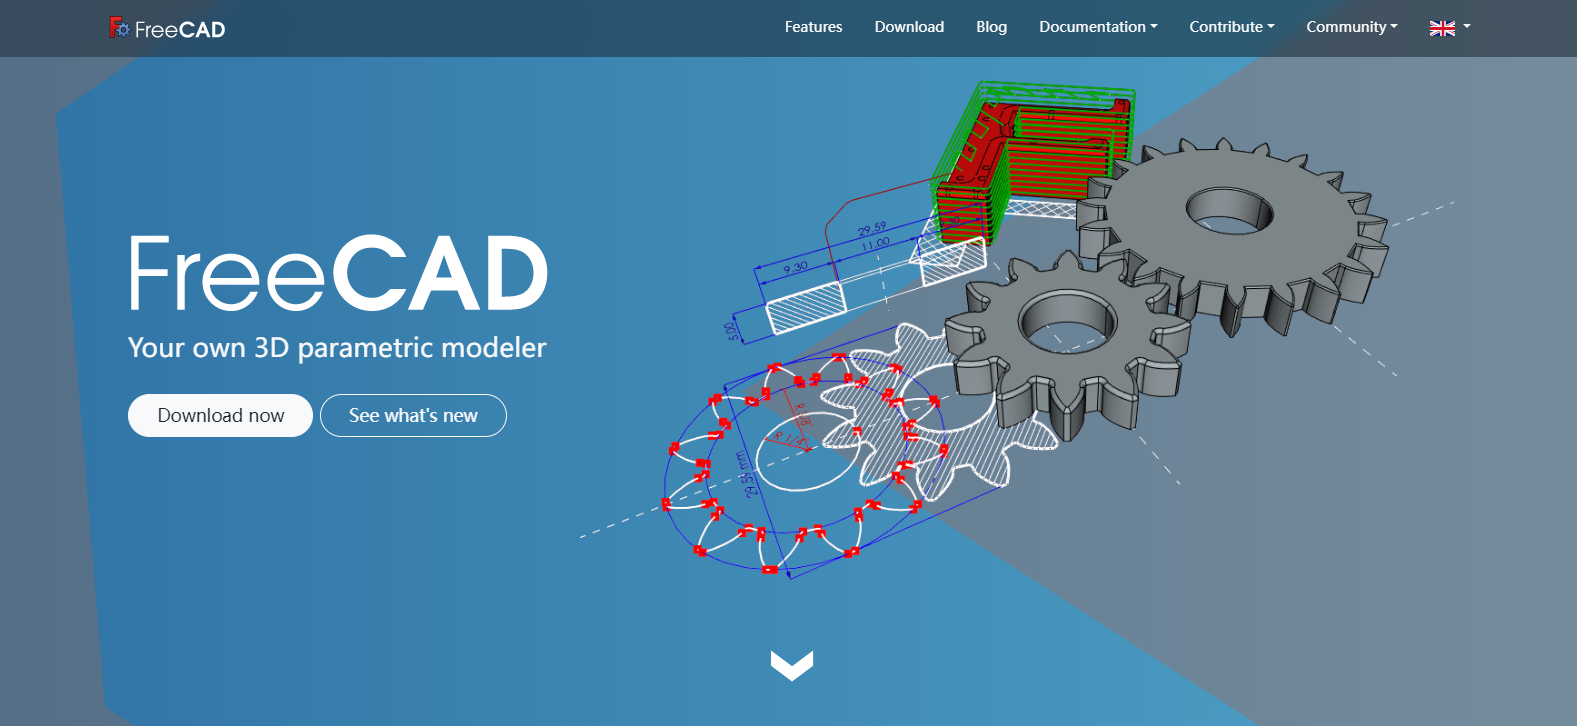 home page of freecad